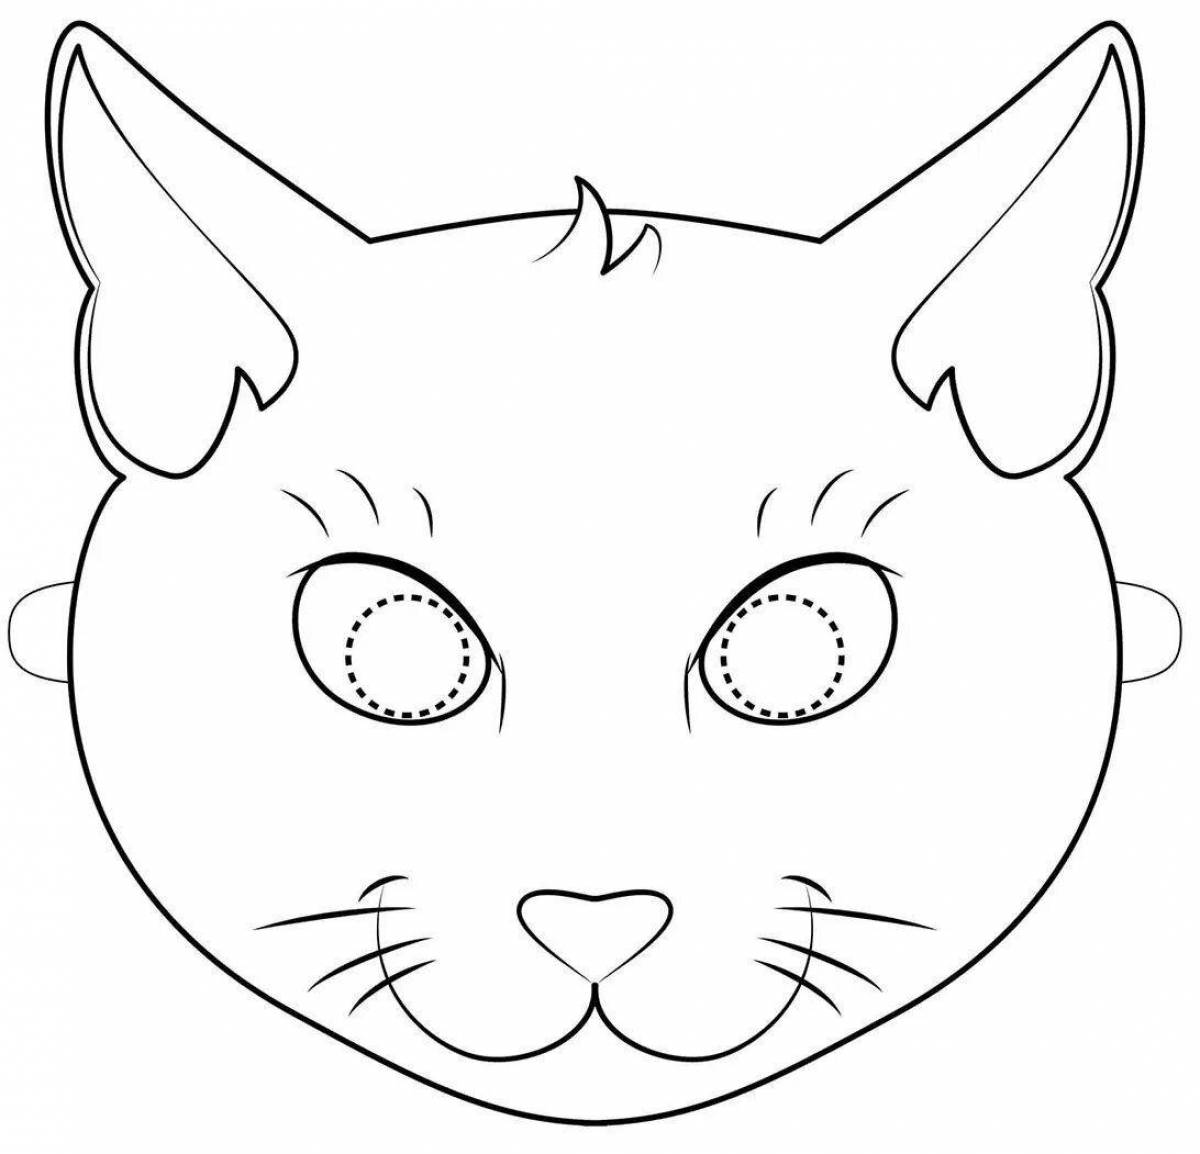 Coloring page glamor cat mask